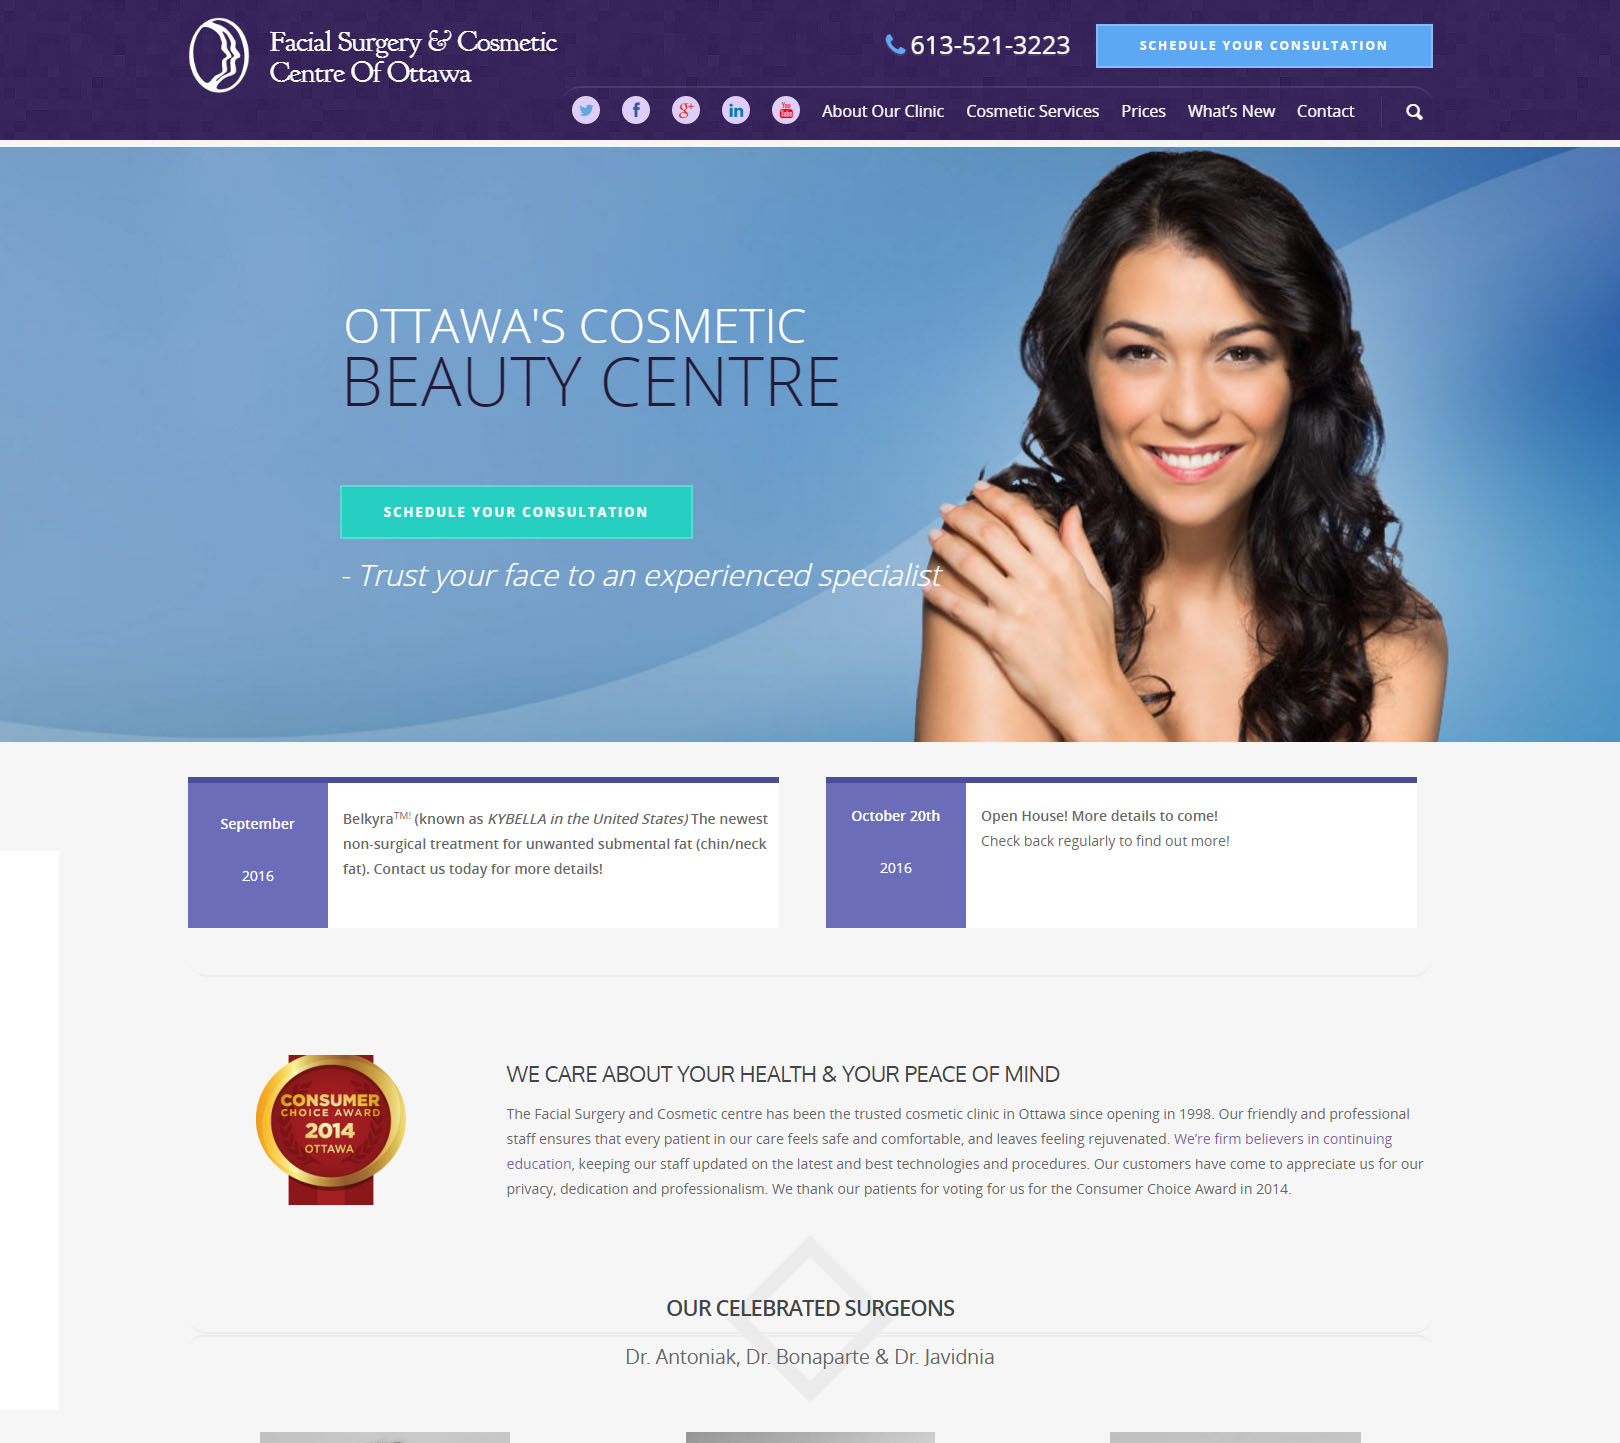 Facial Surgery and Cosmetic Centre of Ottawa website